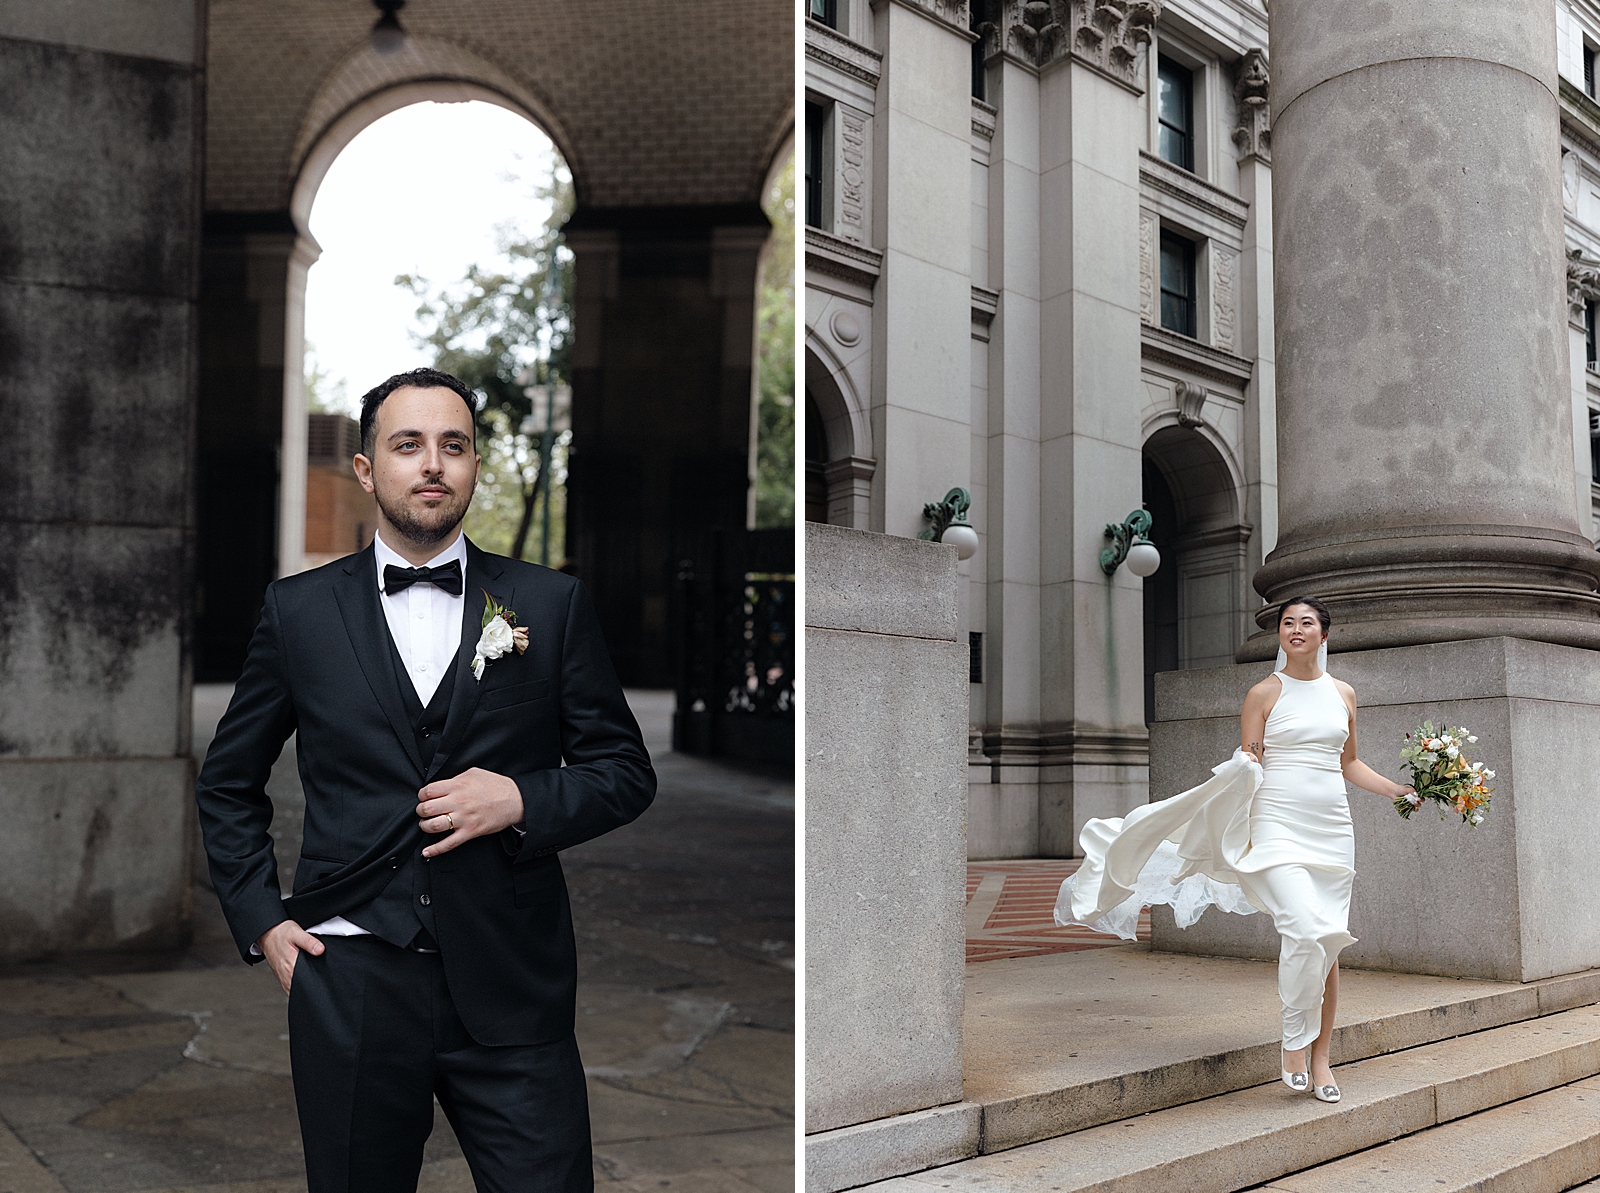 Left photo: Upper body shot of the groom in his suit.
Right photo: Fully body shot of the bride walking down steps in her wedding dress. 